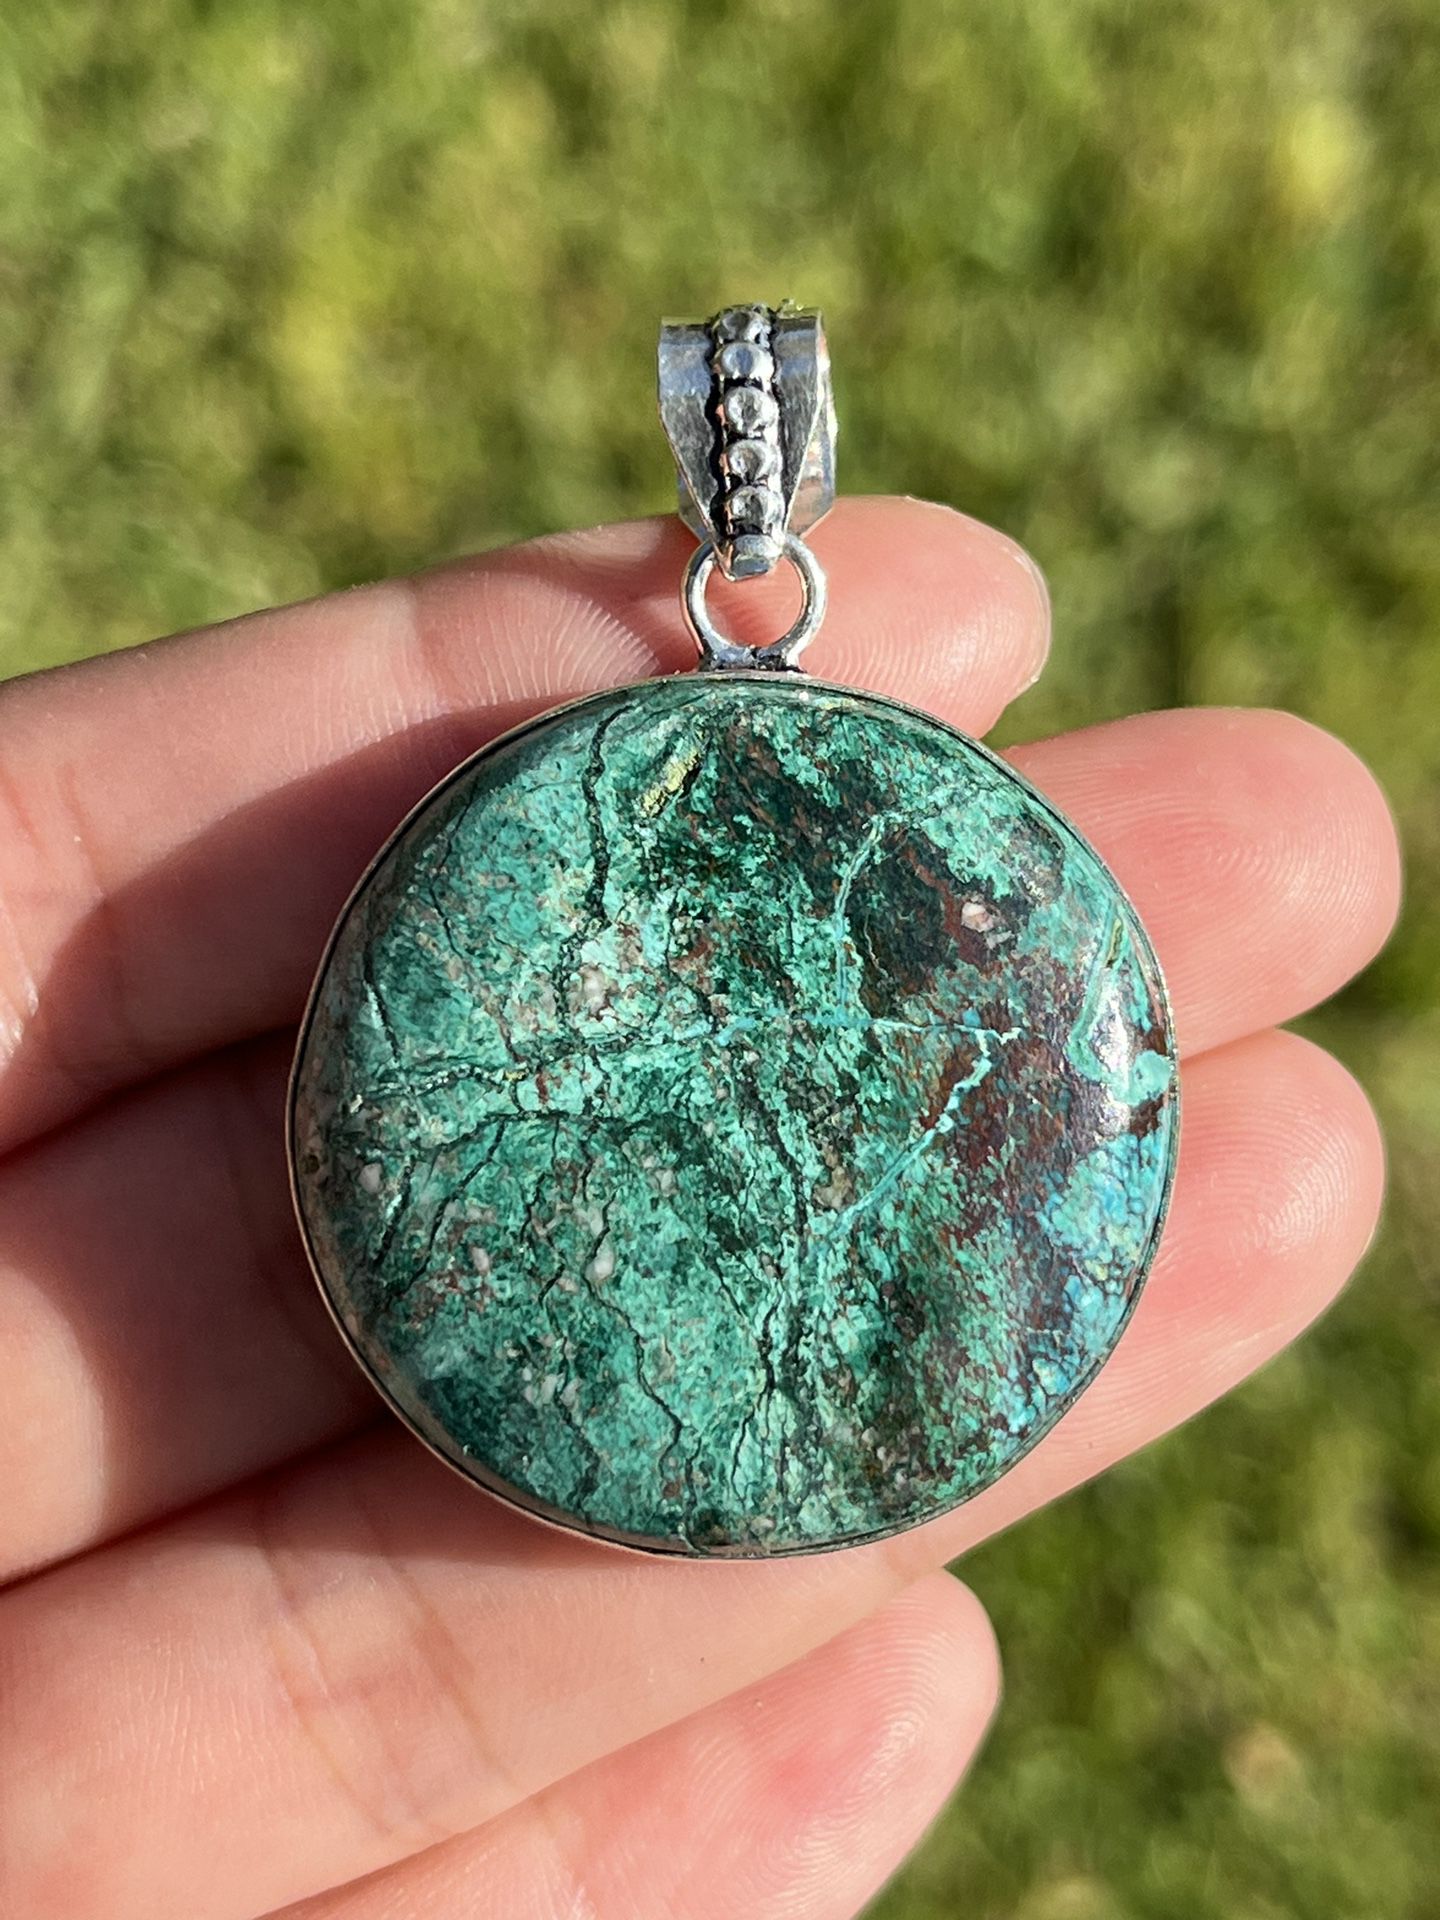 925 Silver Plated African Turquoise Pendant